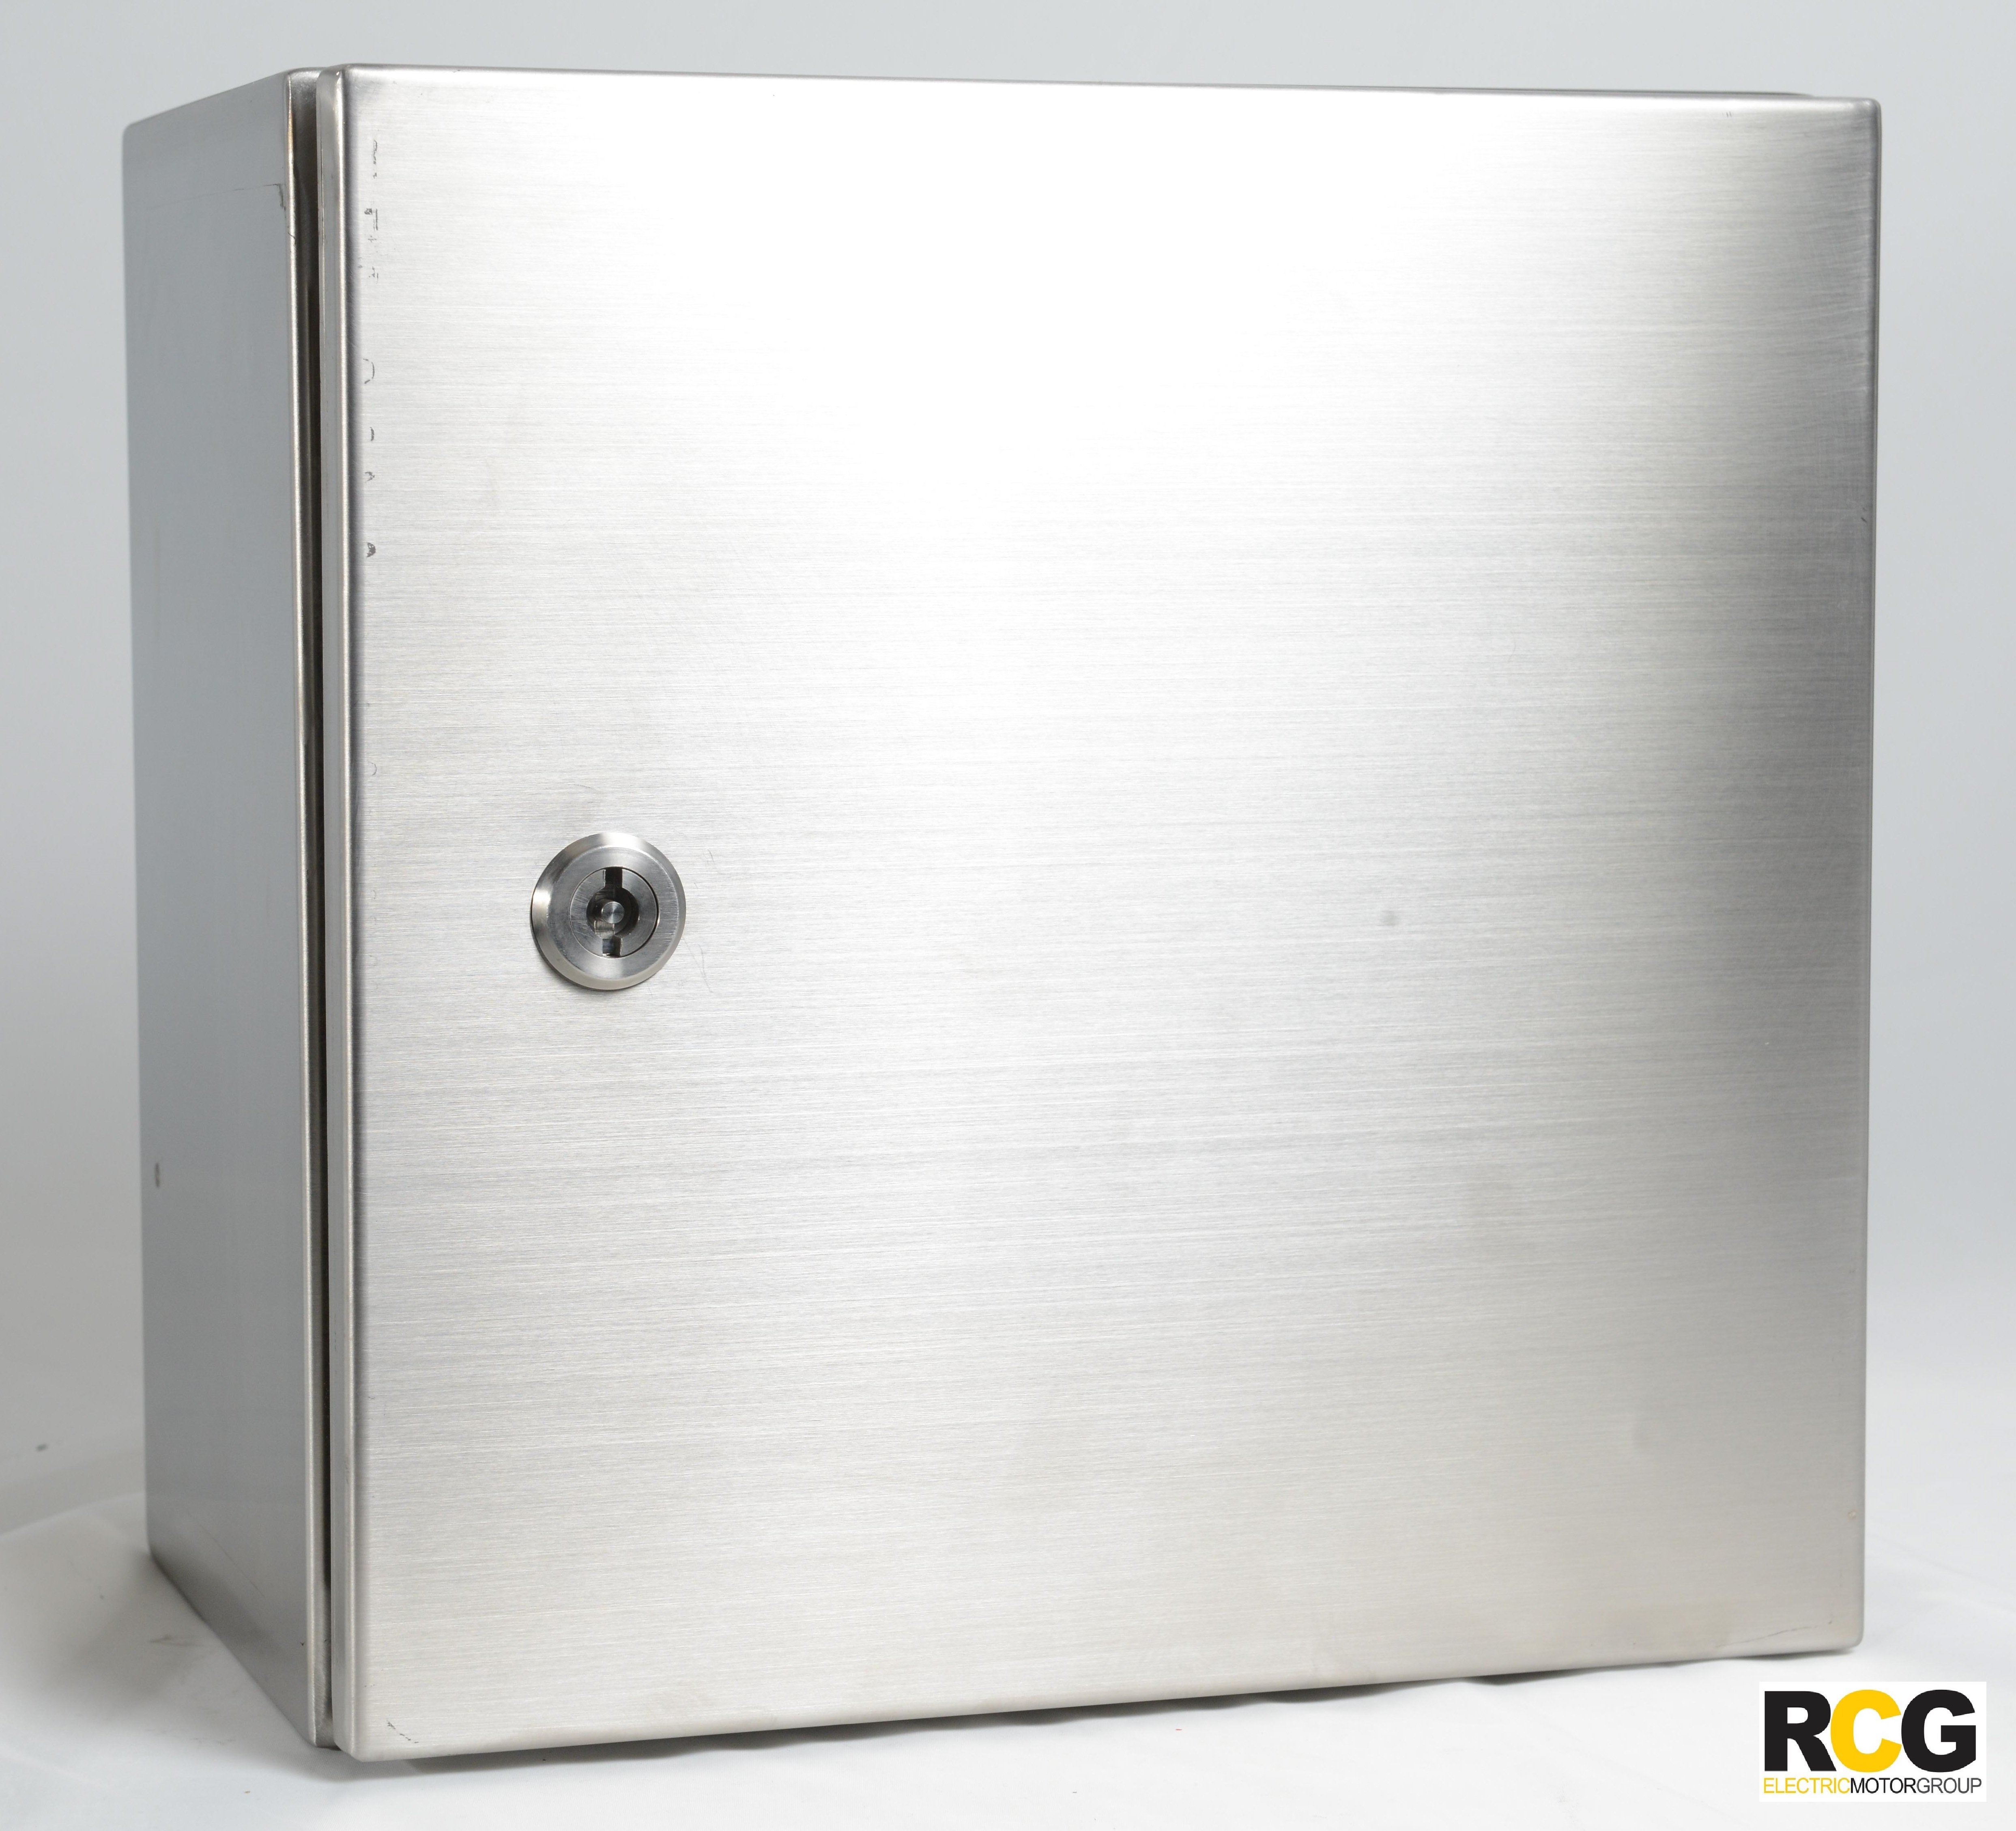 RCG stainless steel enclosure 316 grade 200x200x150mm - wall mounting